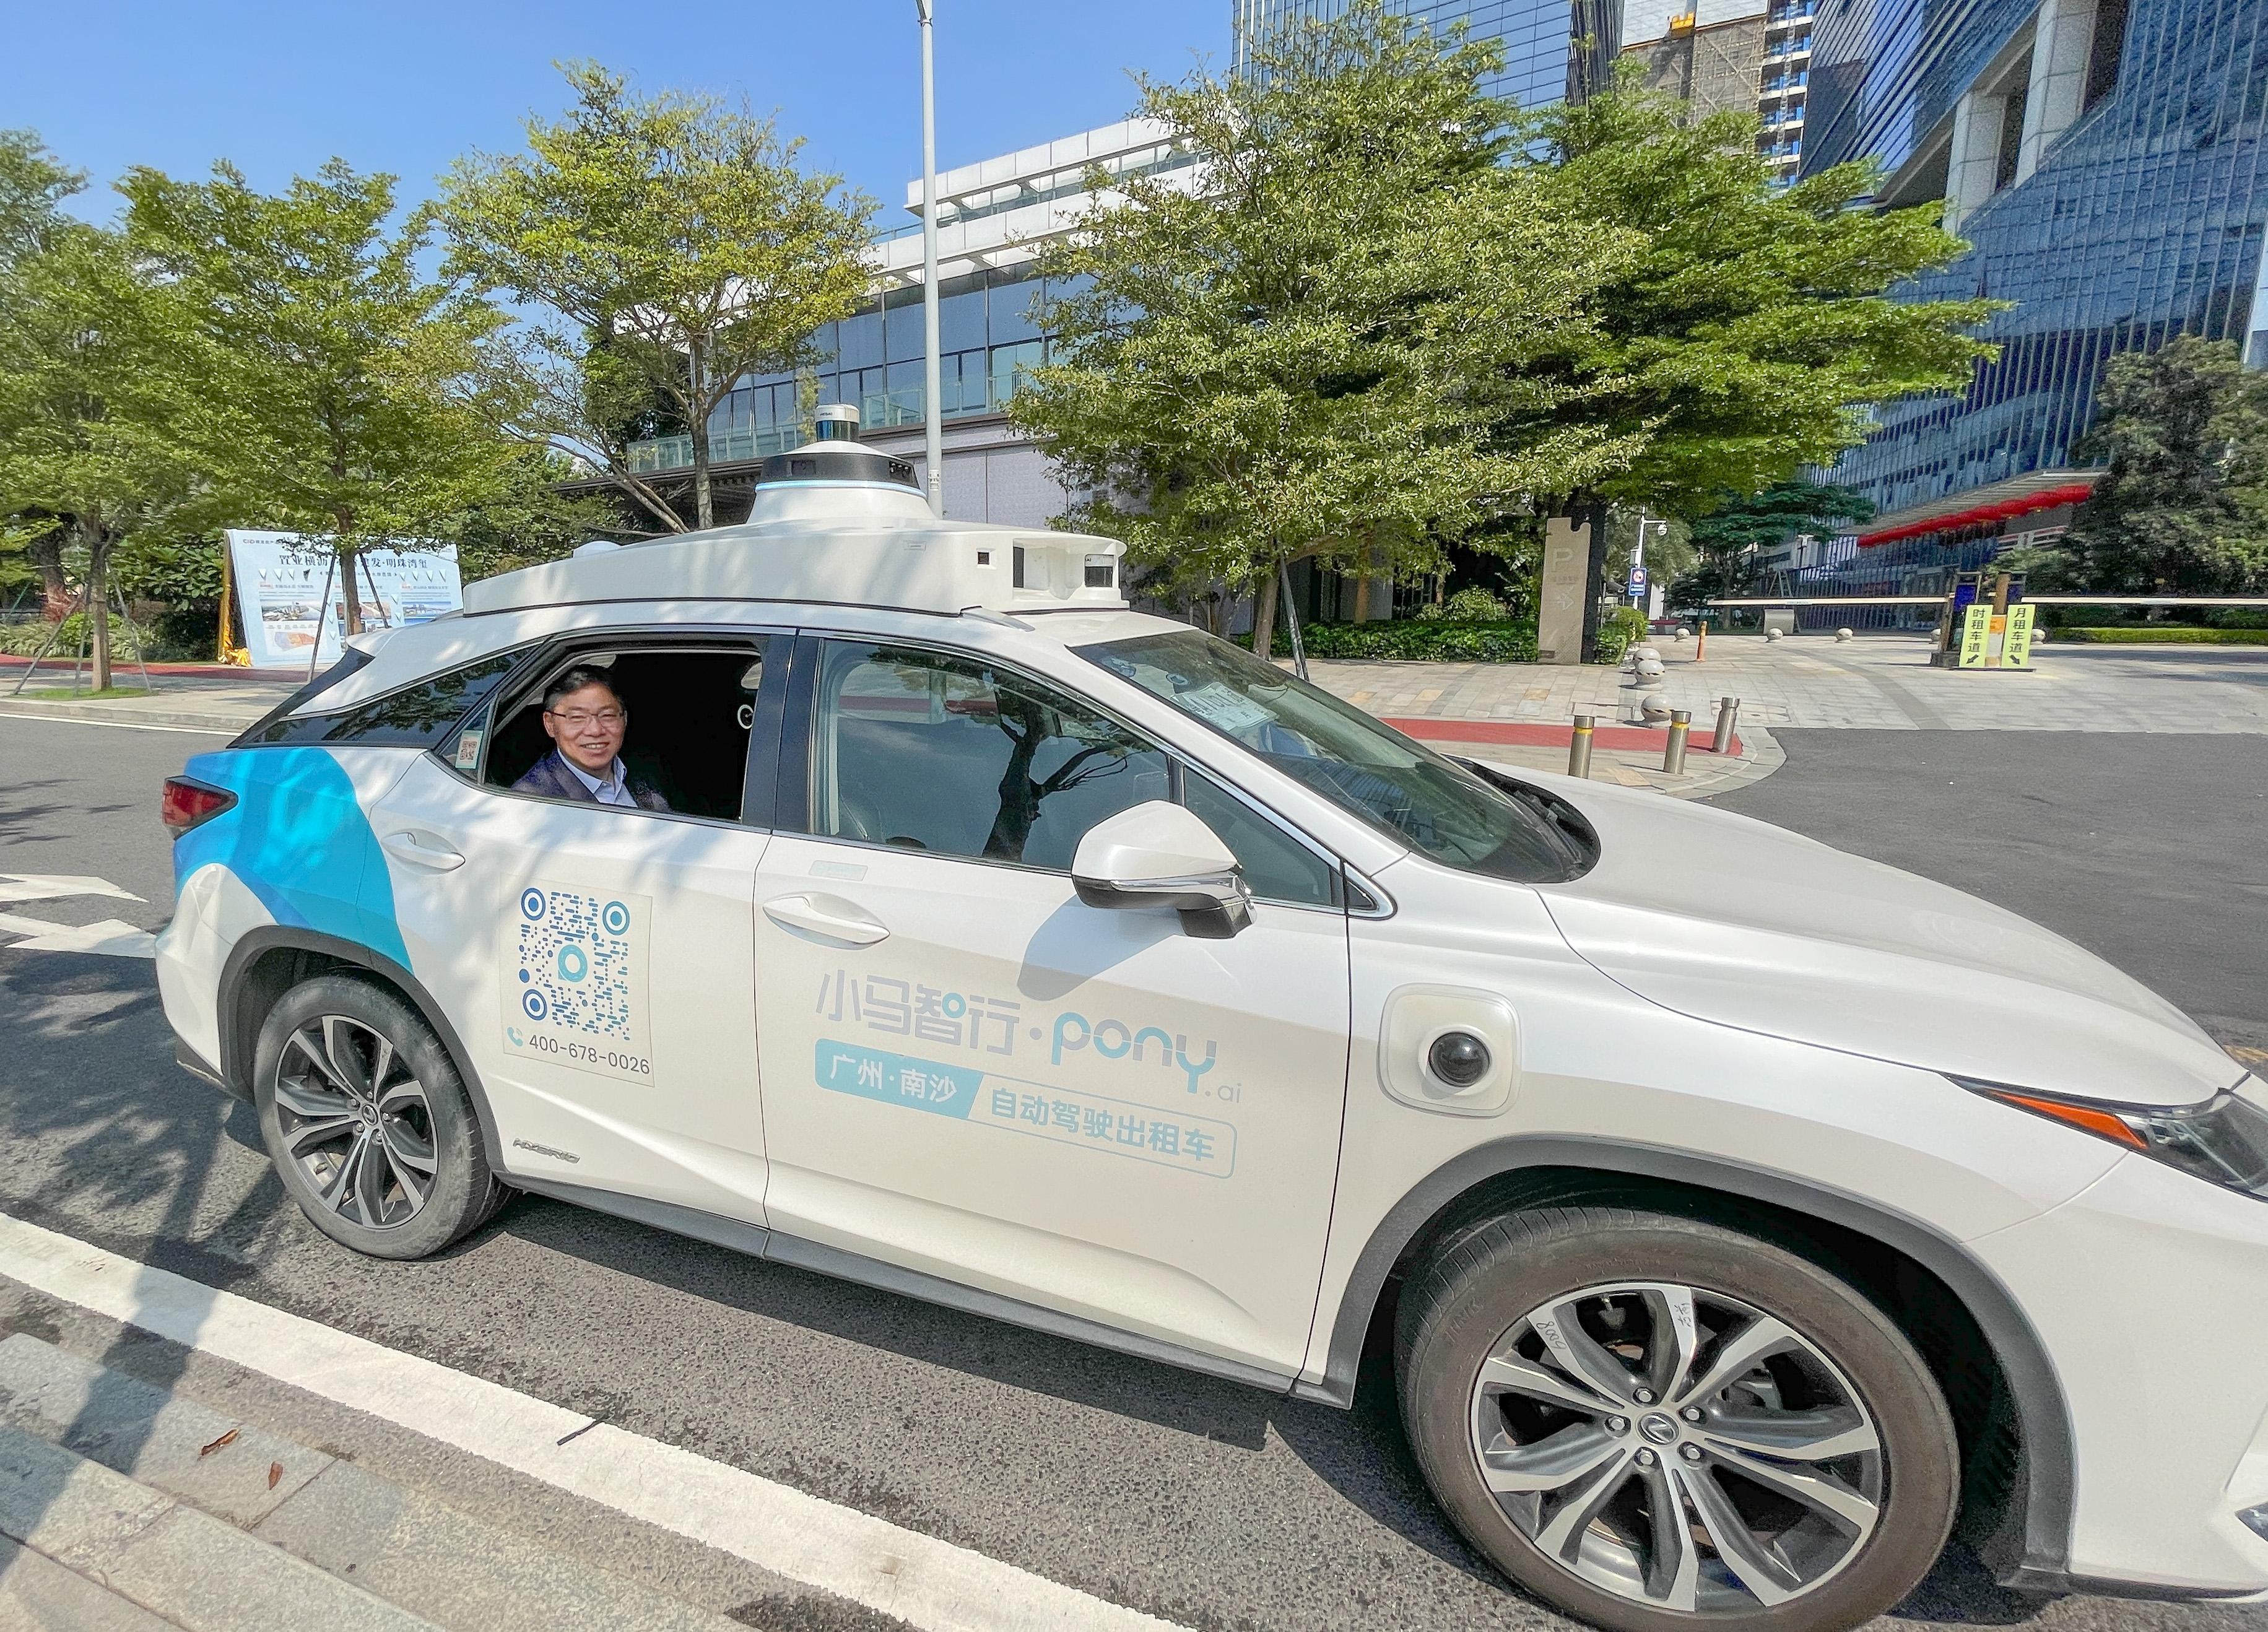 The Secretary for Transport and Logistics, Mr Lam Sai-hung, today (September 21) took a test ride in an autonomous taxi (Robotaxi) operated by Pony.ai in Nansha District, Guangzhou.